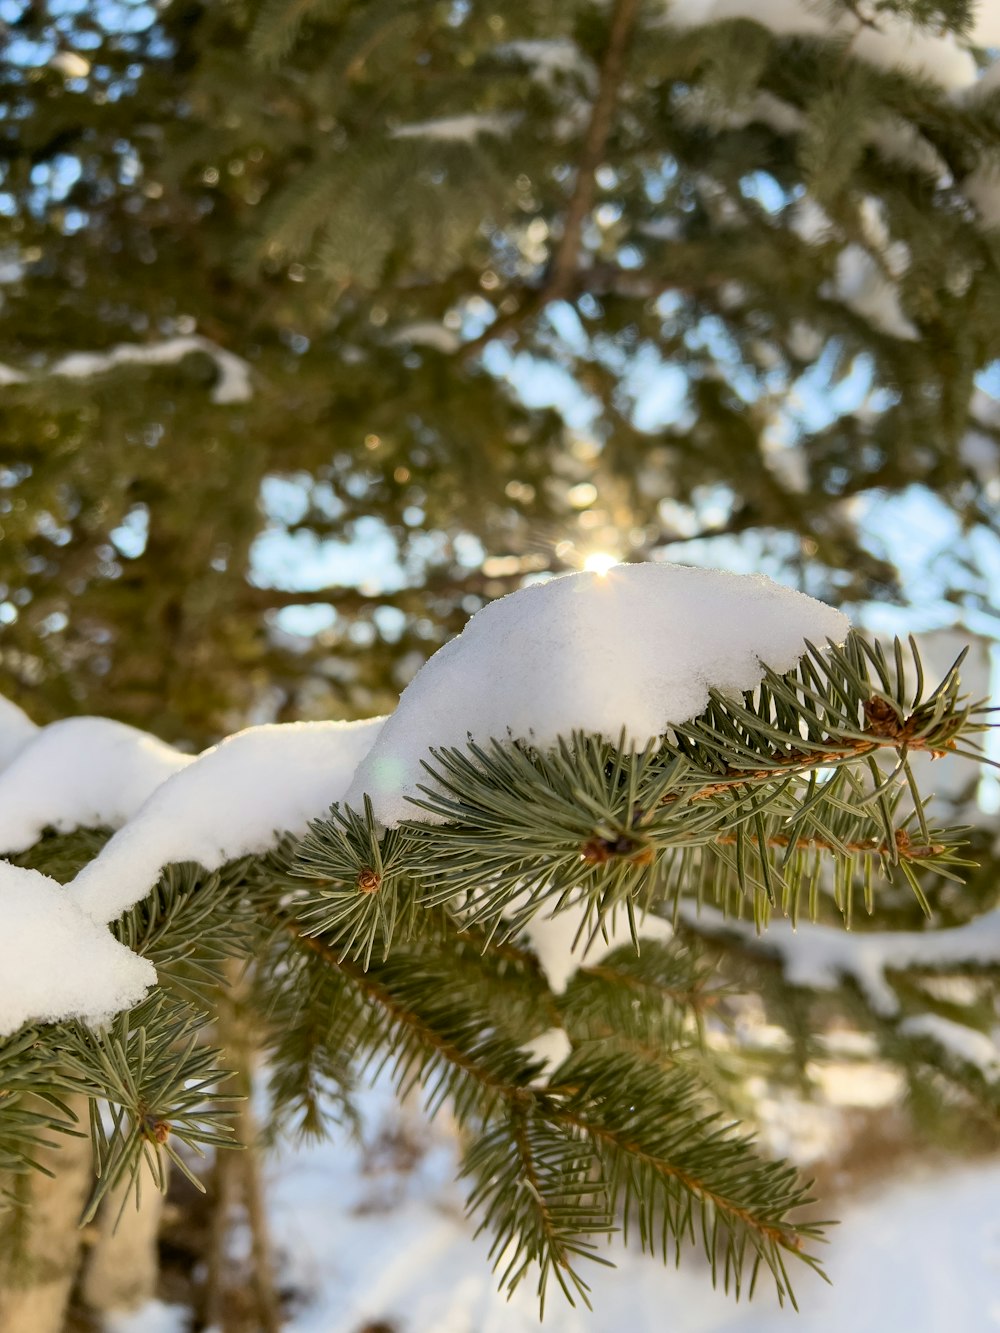 a snow covered pine tree branch with snow on it